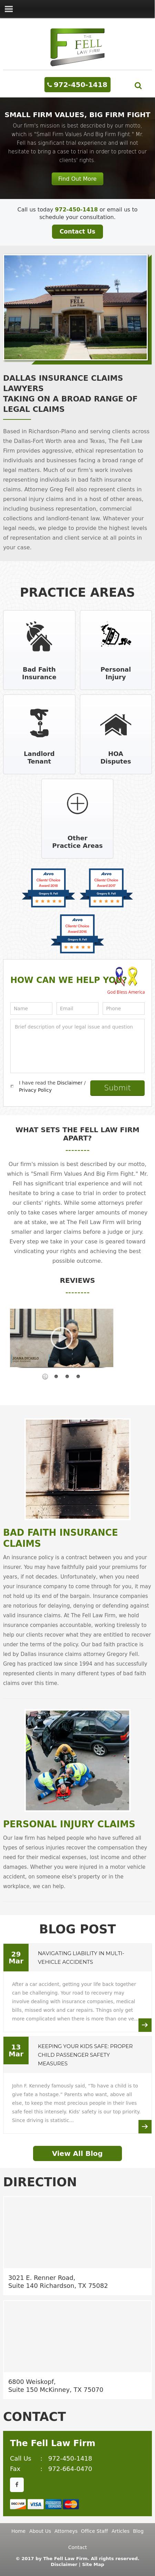 The Fell Law Firm - Richardson TX Lawyers